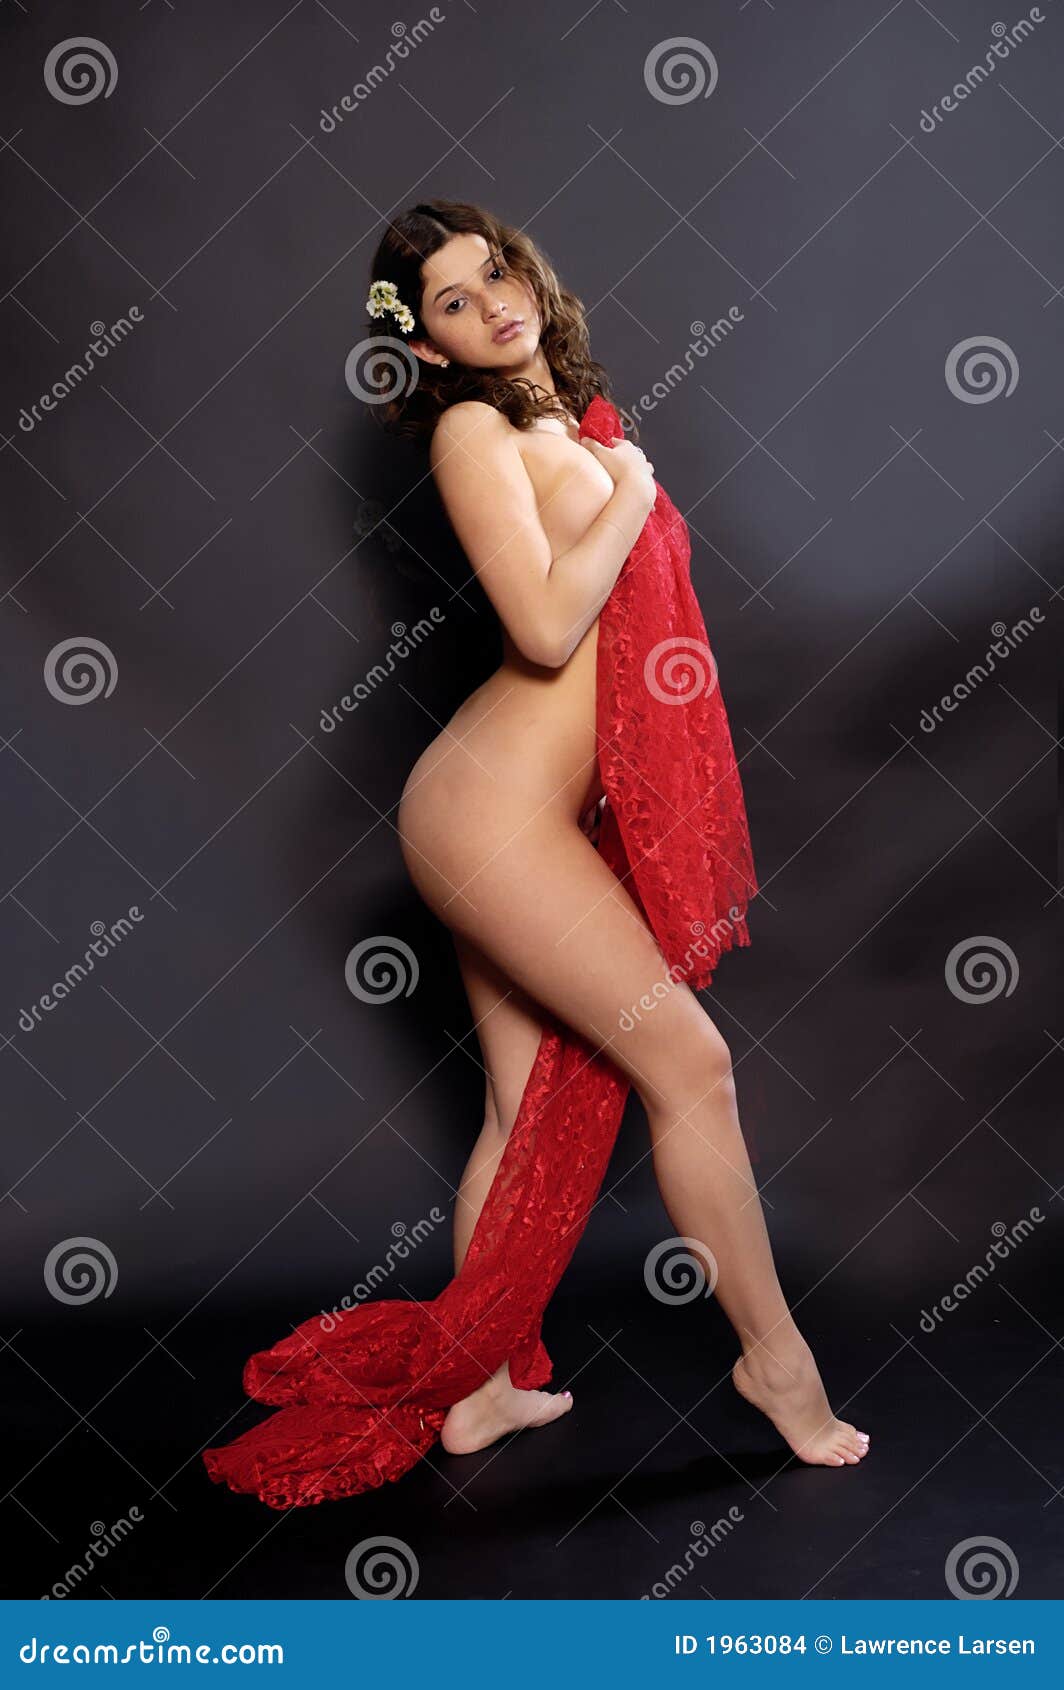 Red nude the woman in Video of